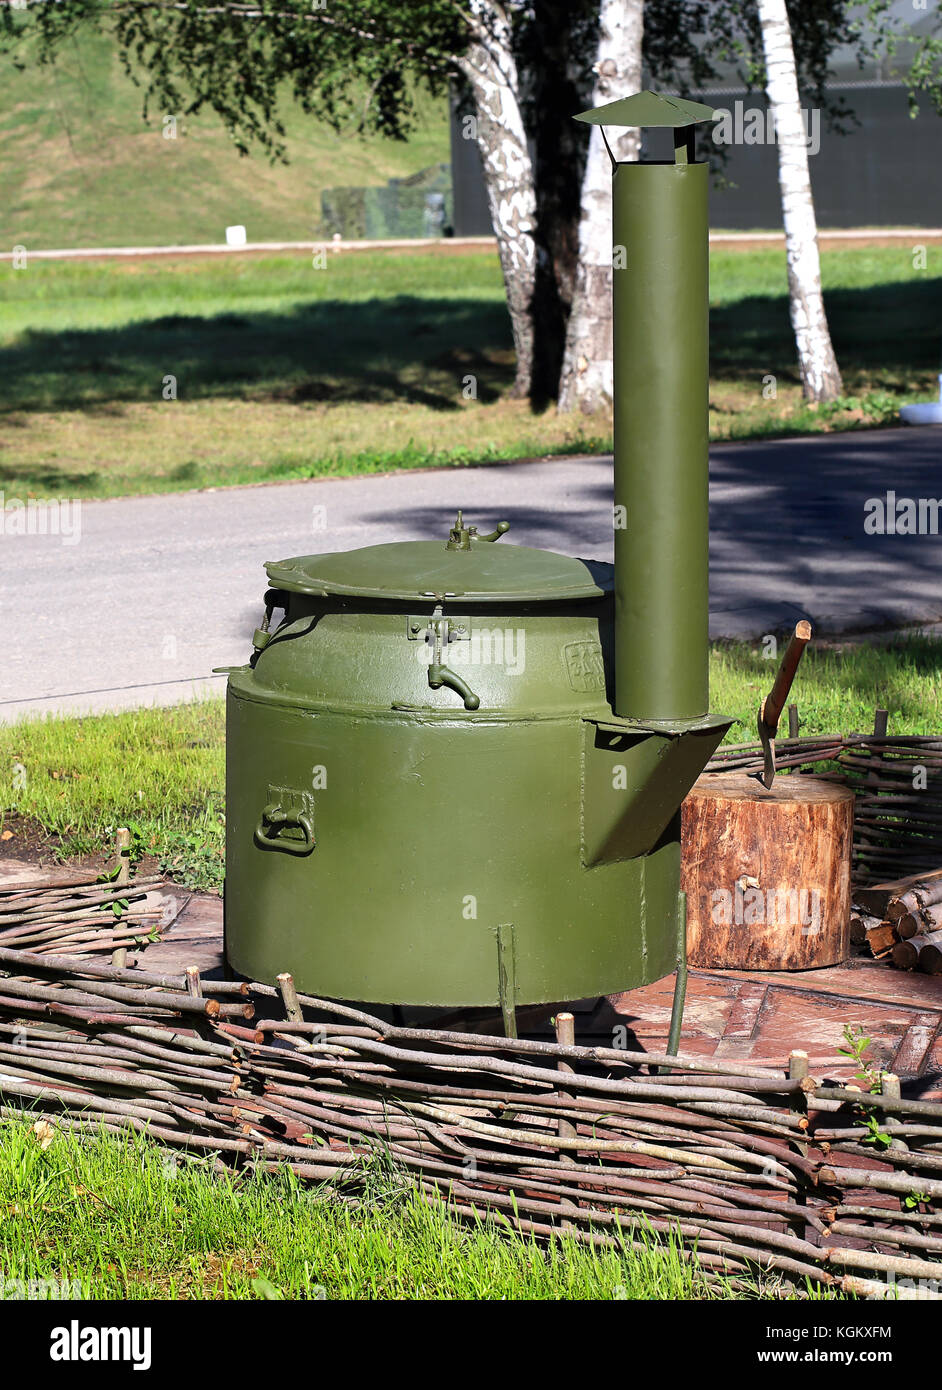 Army portable boiler with built-in oven to cook in the field conditions Stock Photo